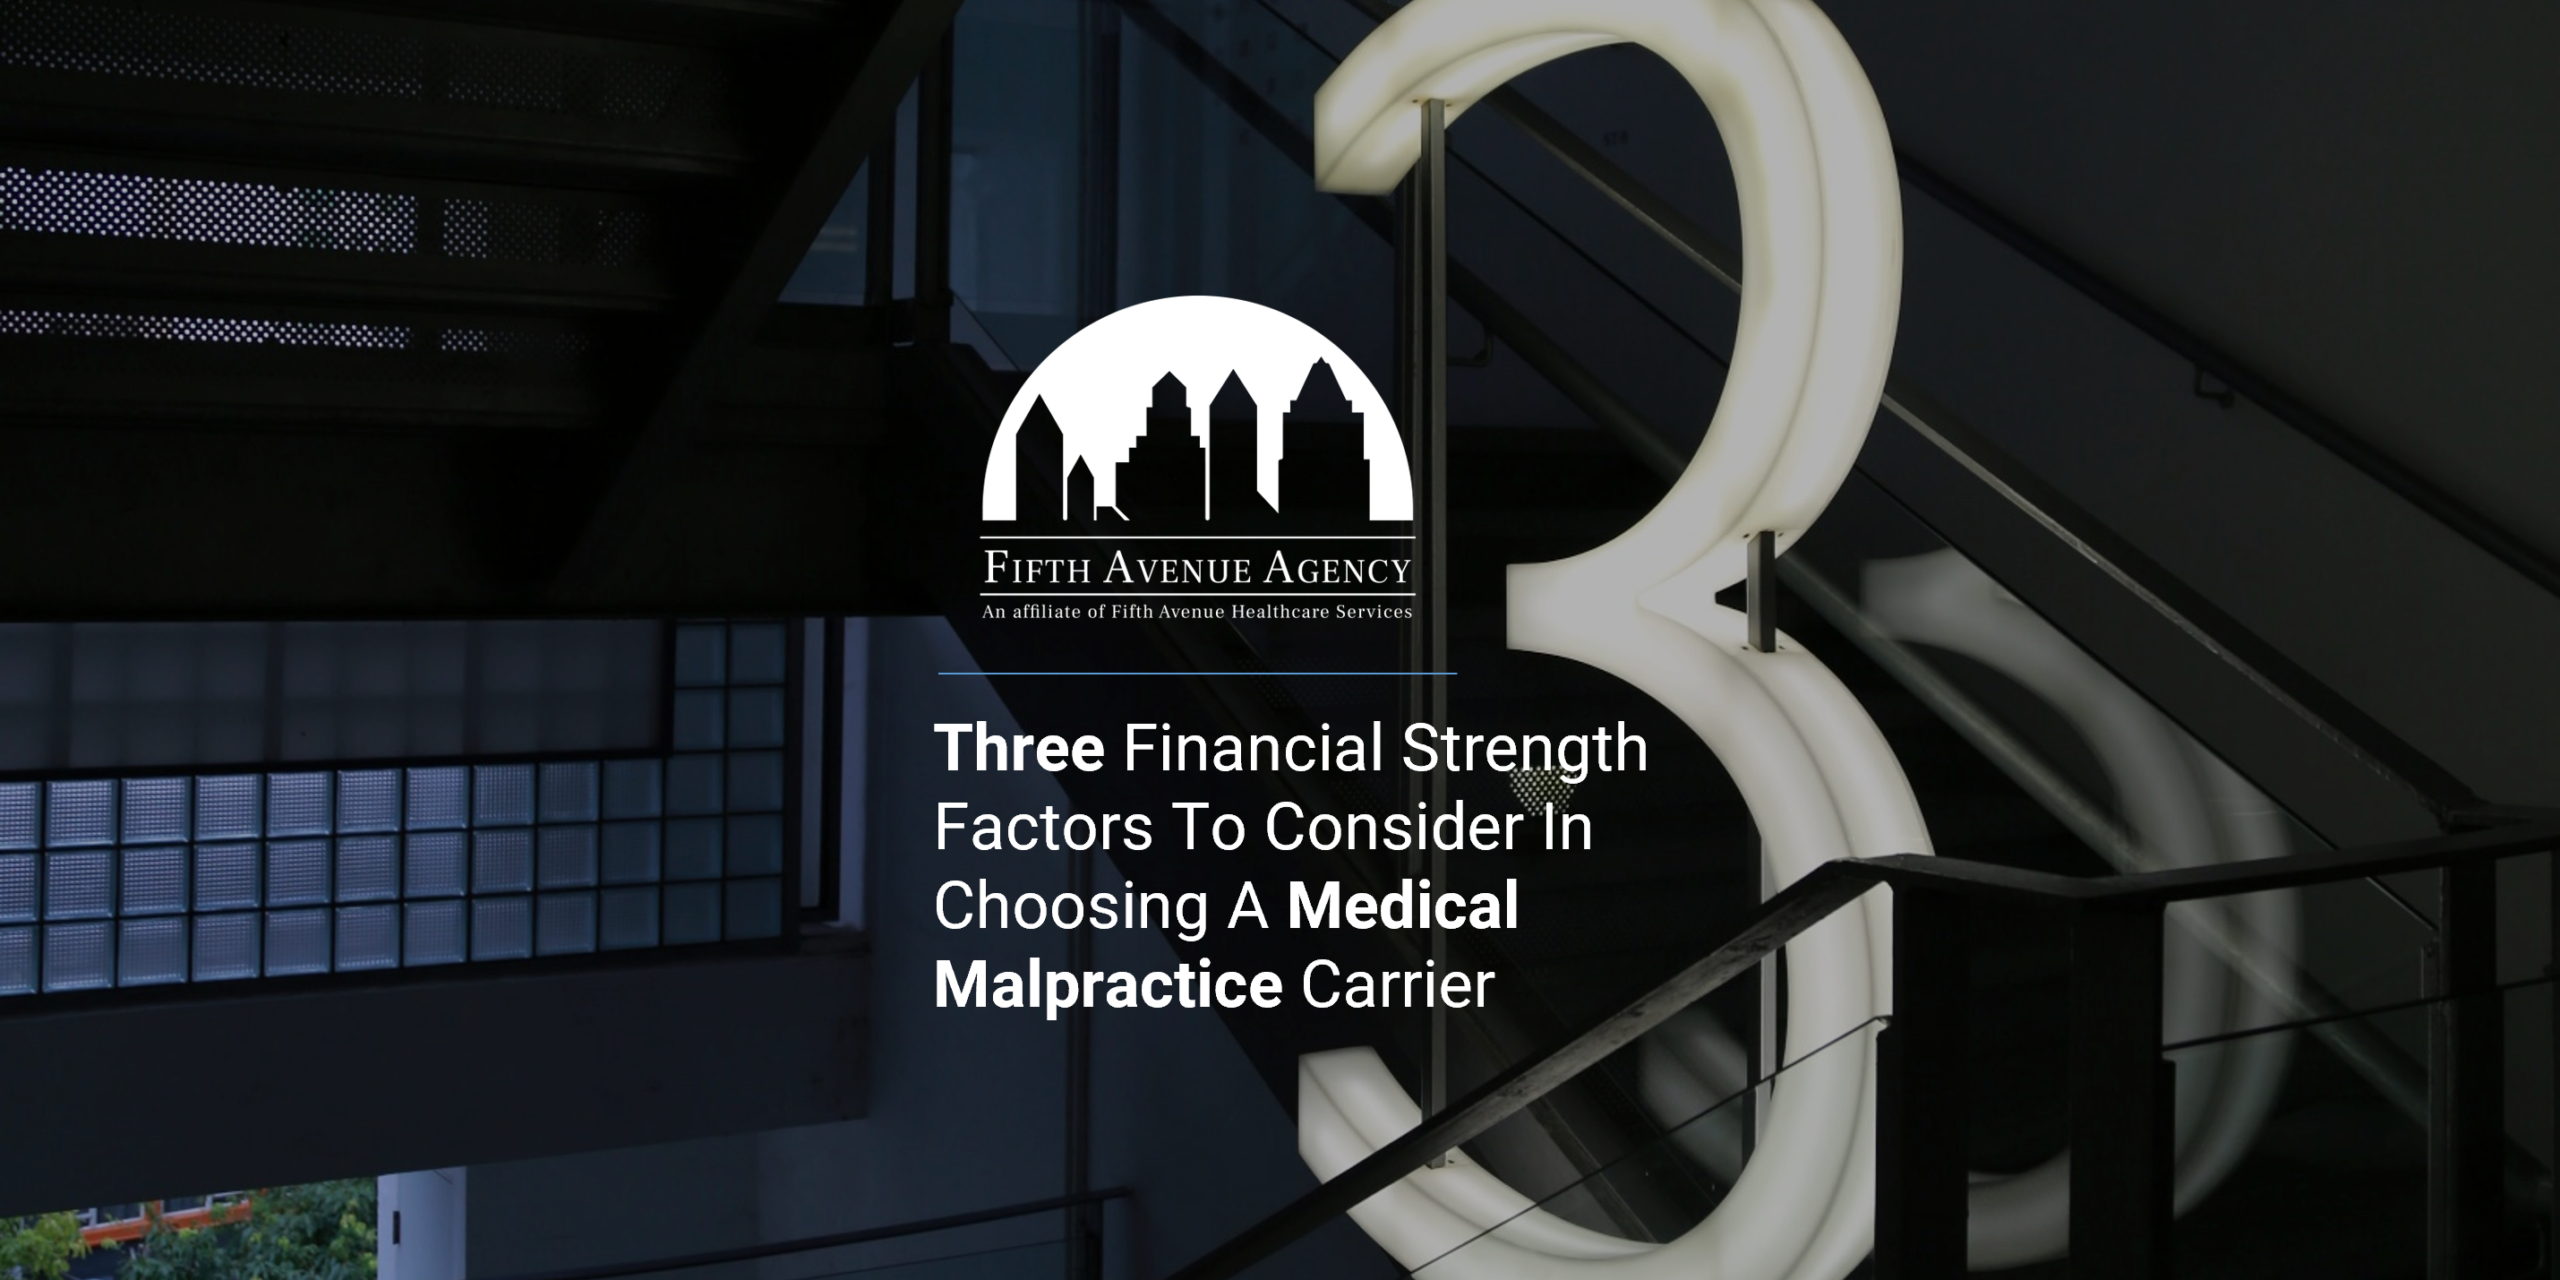 FifthAvenueAgency.com 3 Financial Strength Factors Of A Medical Malpractice Carrier